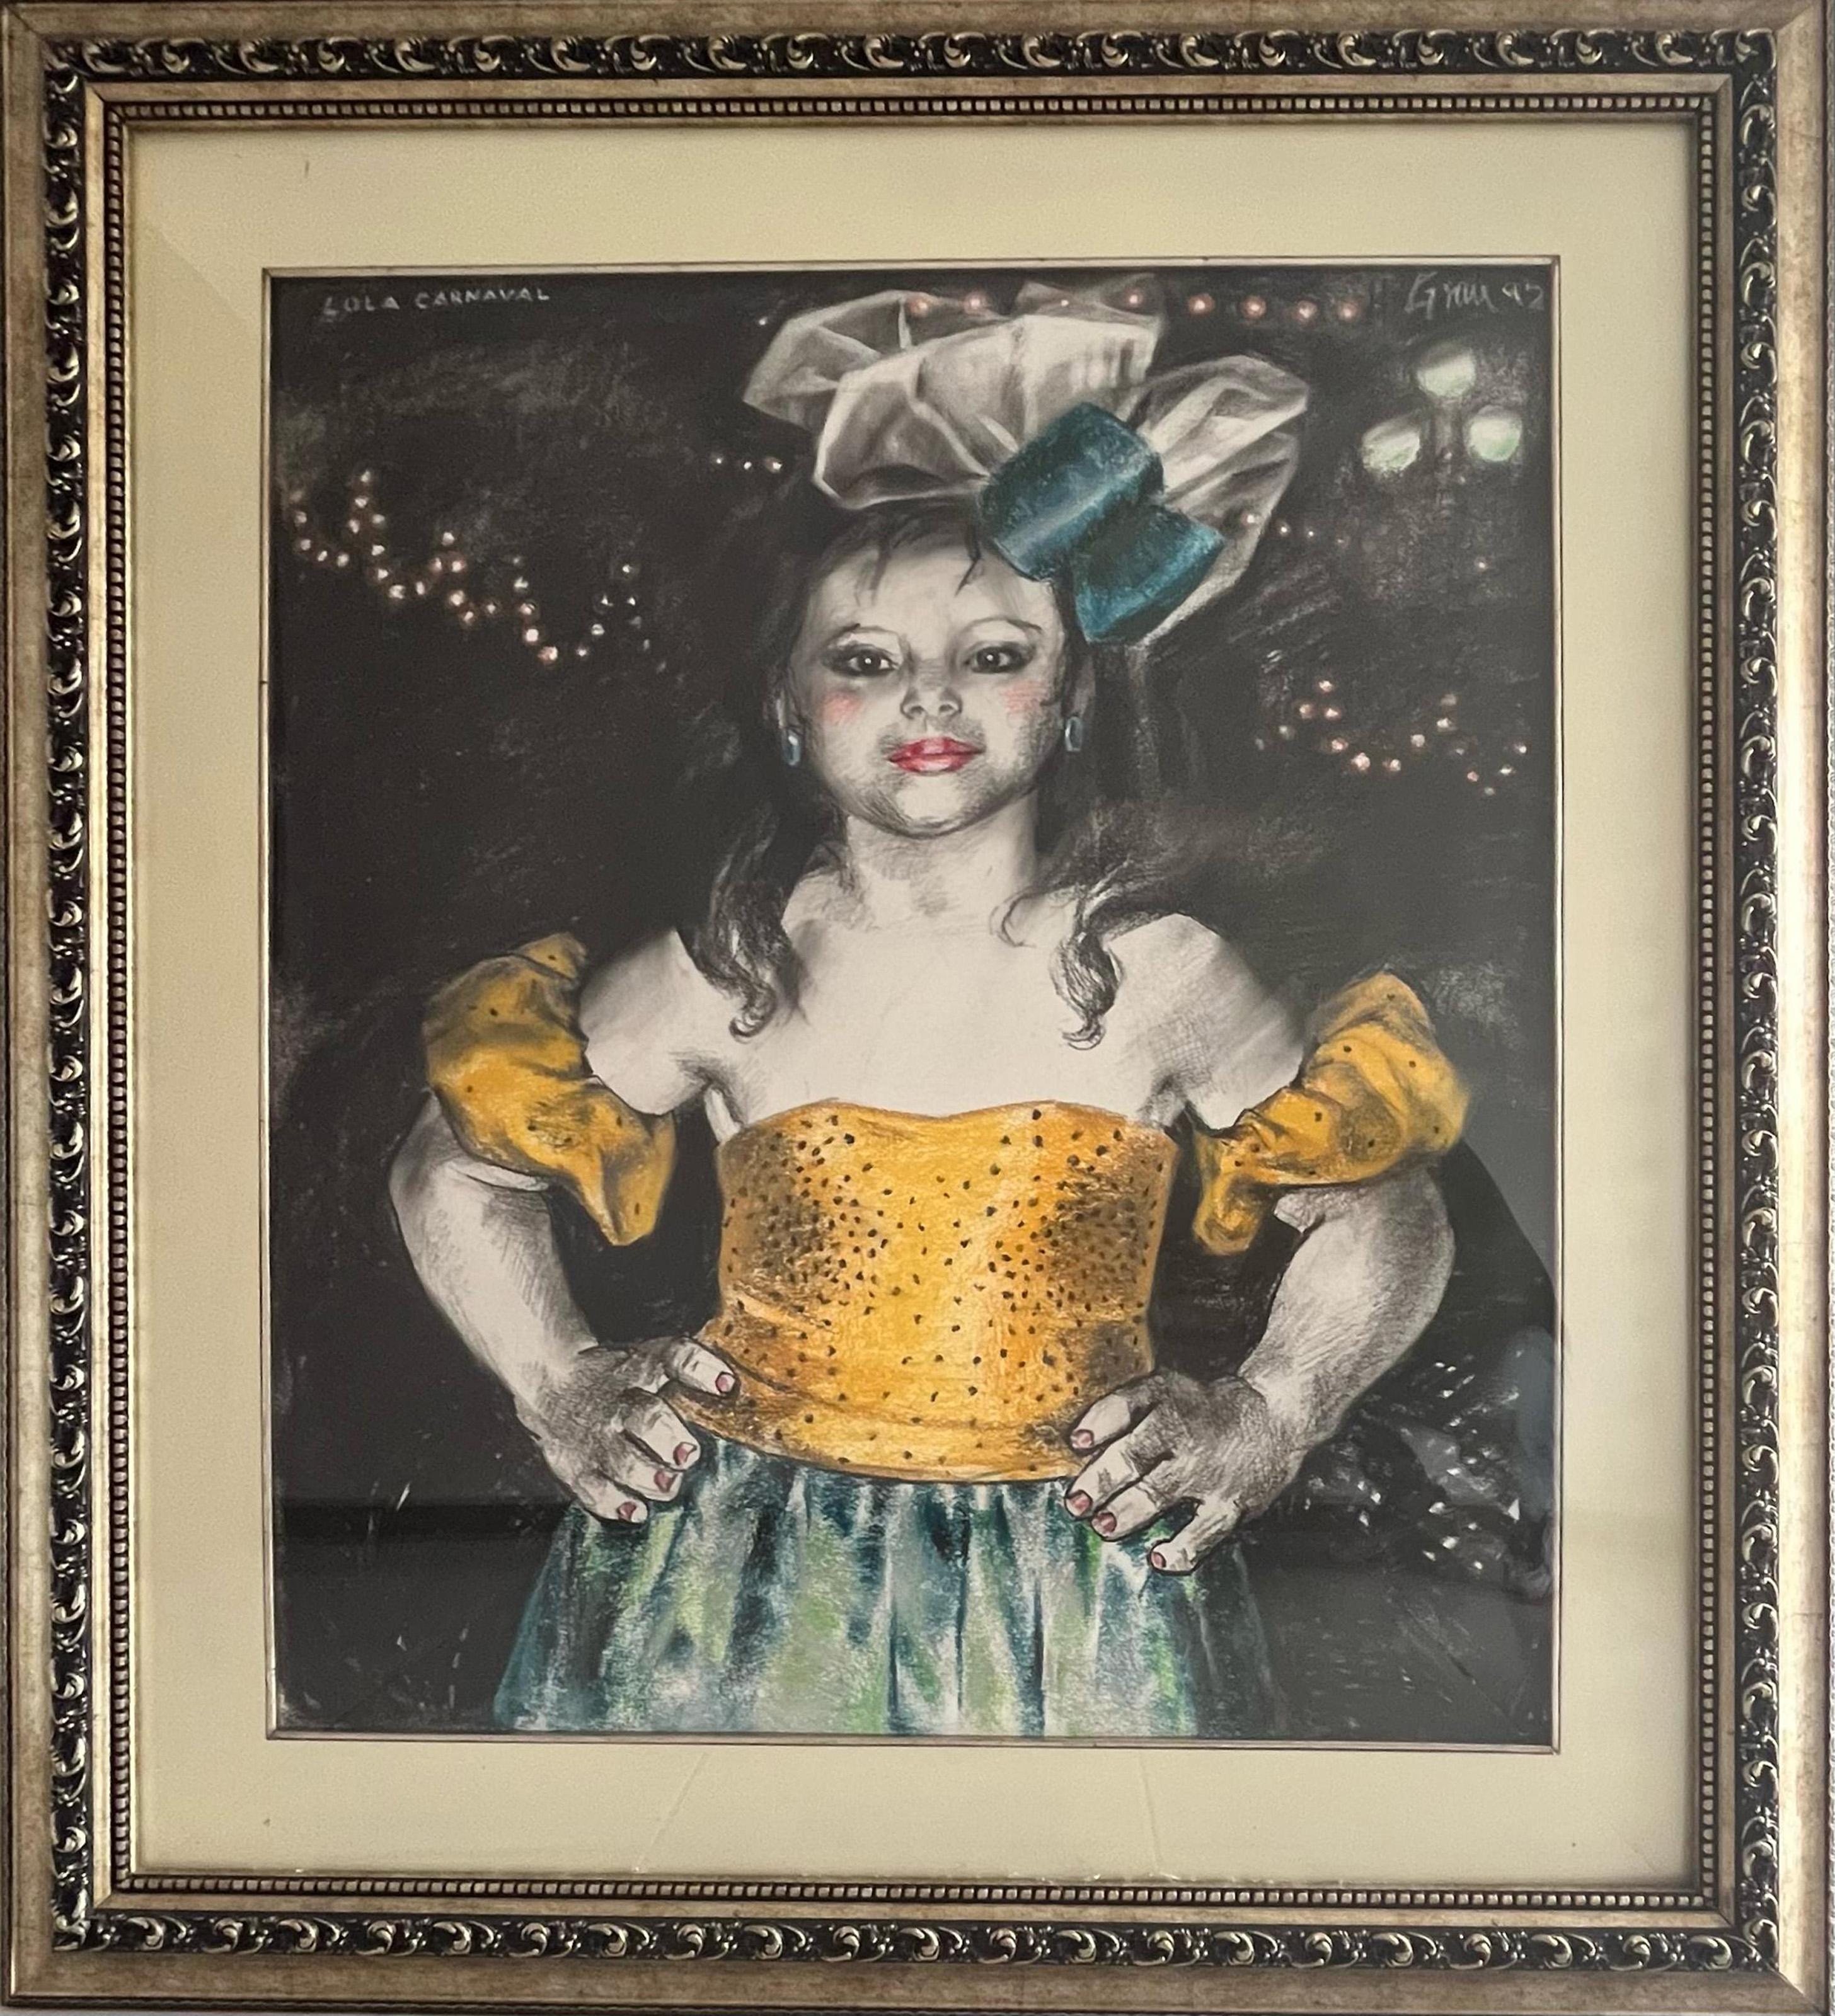 Lola Carnaval
Enrique Grau, Colombian (1920–2004)
Date: 1992
Charcoal and Pastel, signed, titled and dated
Size: 43.25 x 39.5 in. (109.86 x 100.33 cm)
Frame Size: 58.25 x 52.5 inches